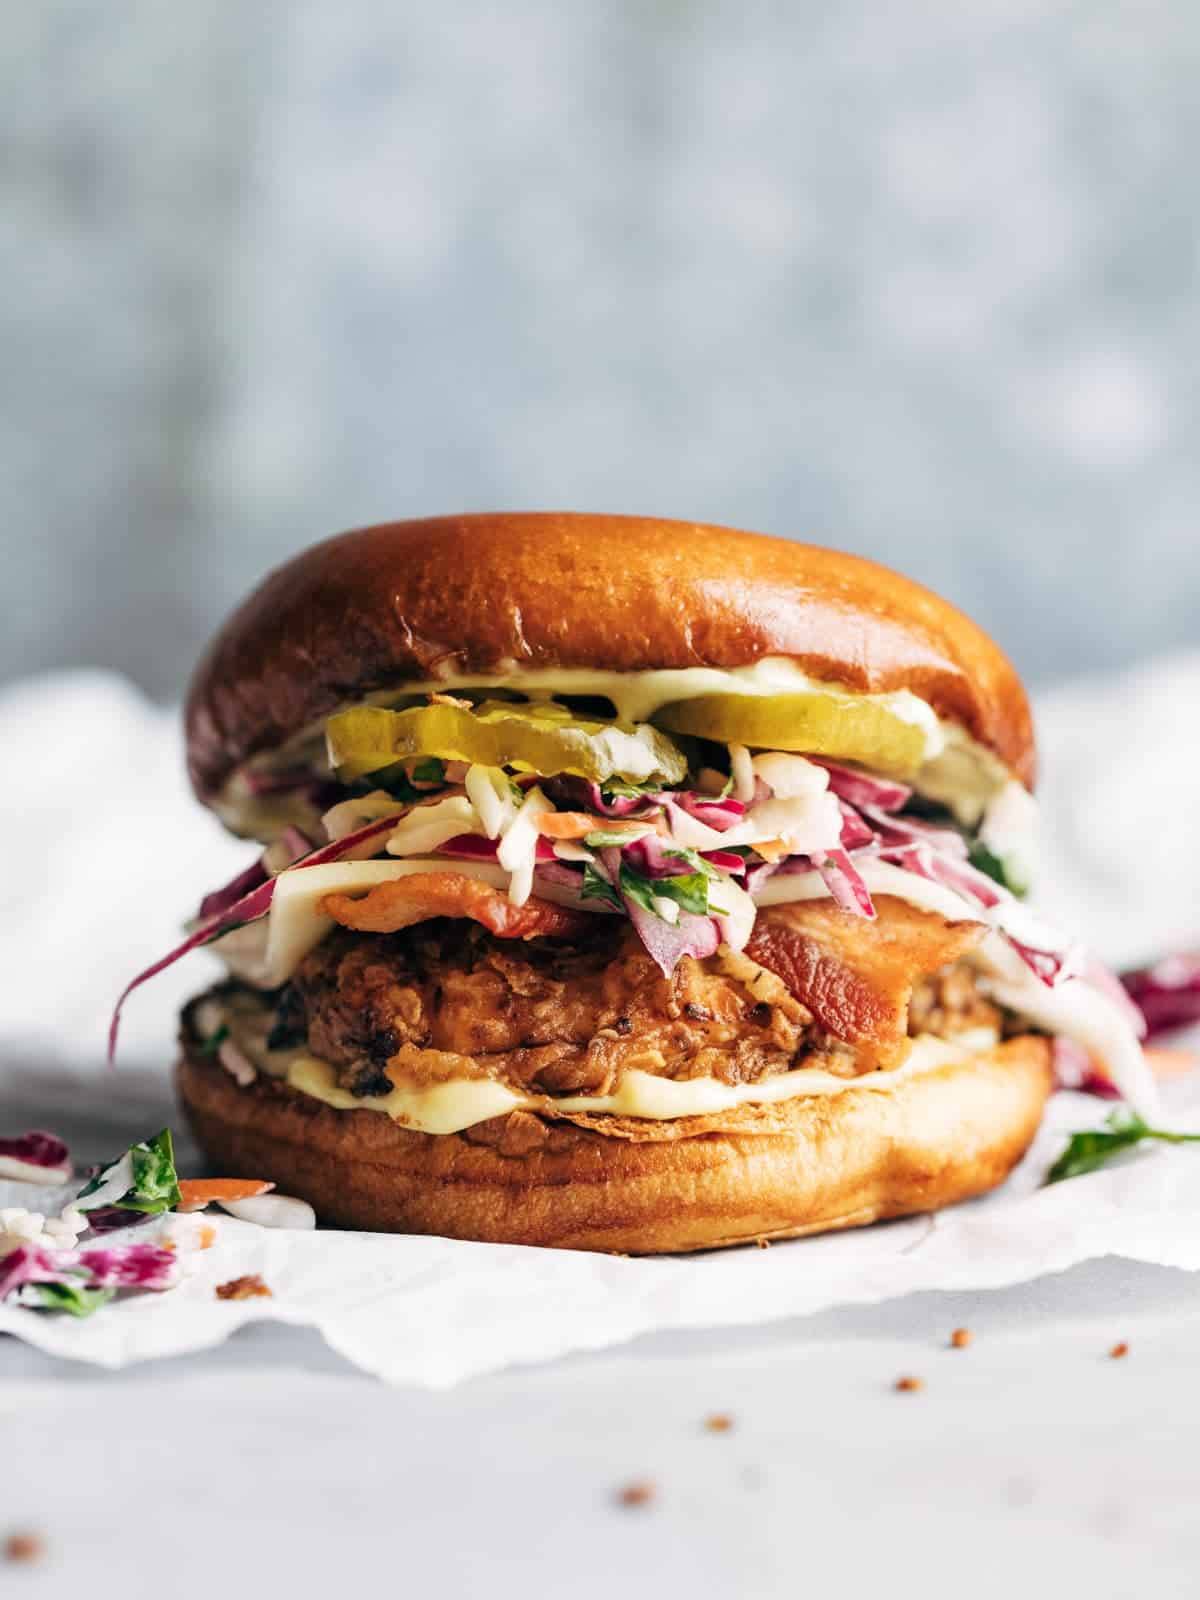 Fried chicken sandwich with slaw and pickles.